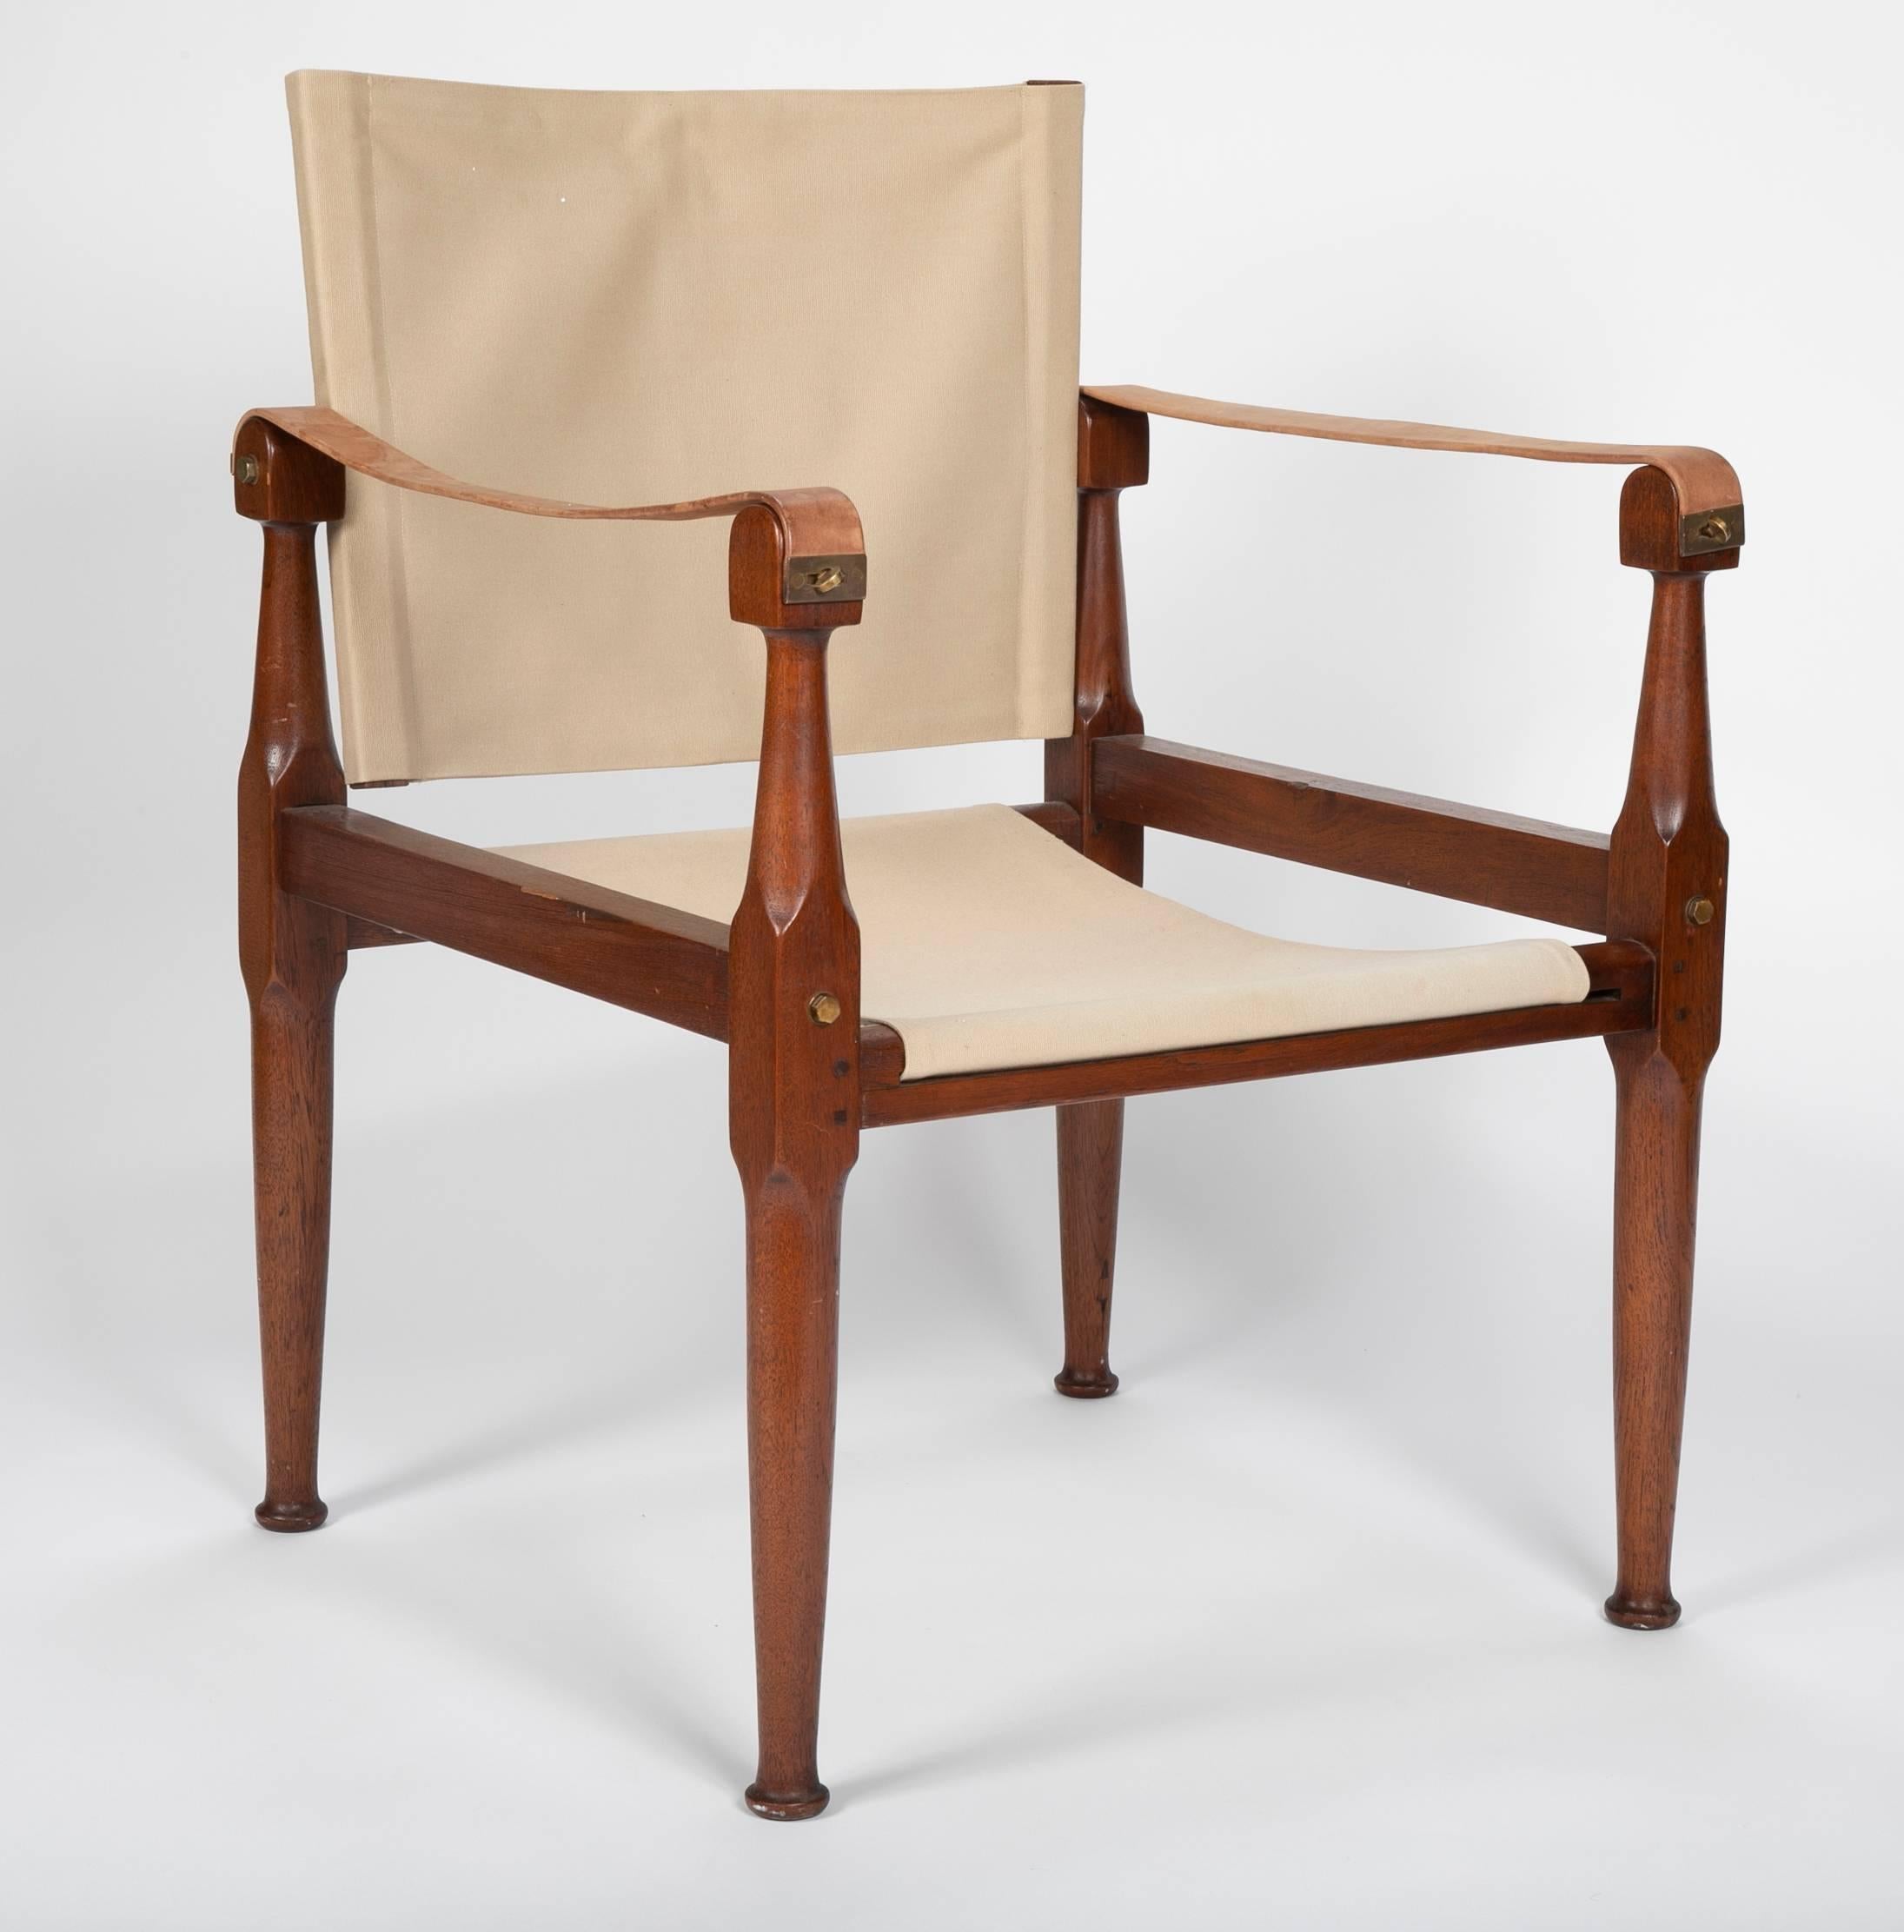 Danish Pair of Campaign Chairs in the Manner of Karre Klint